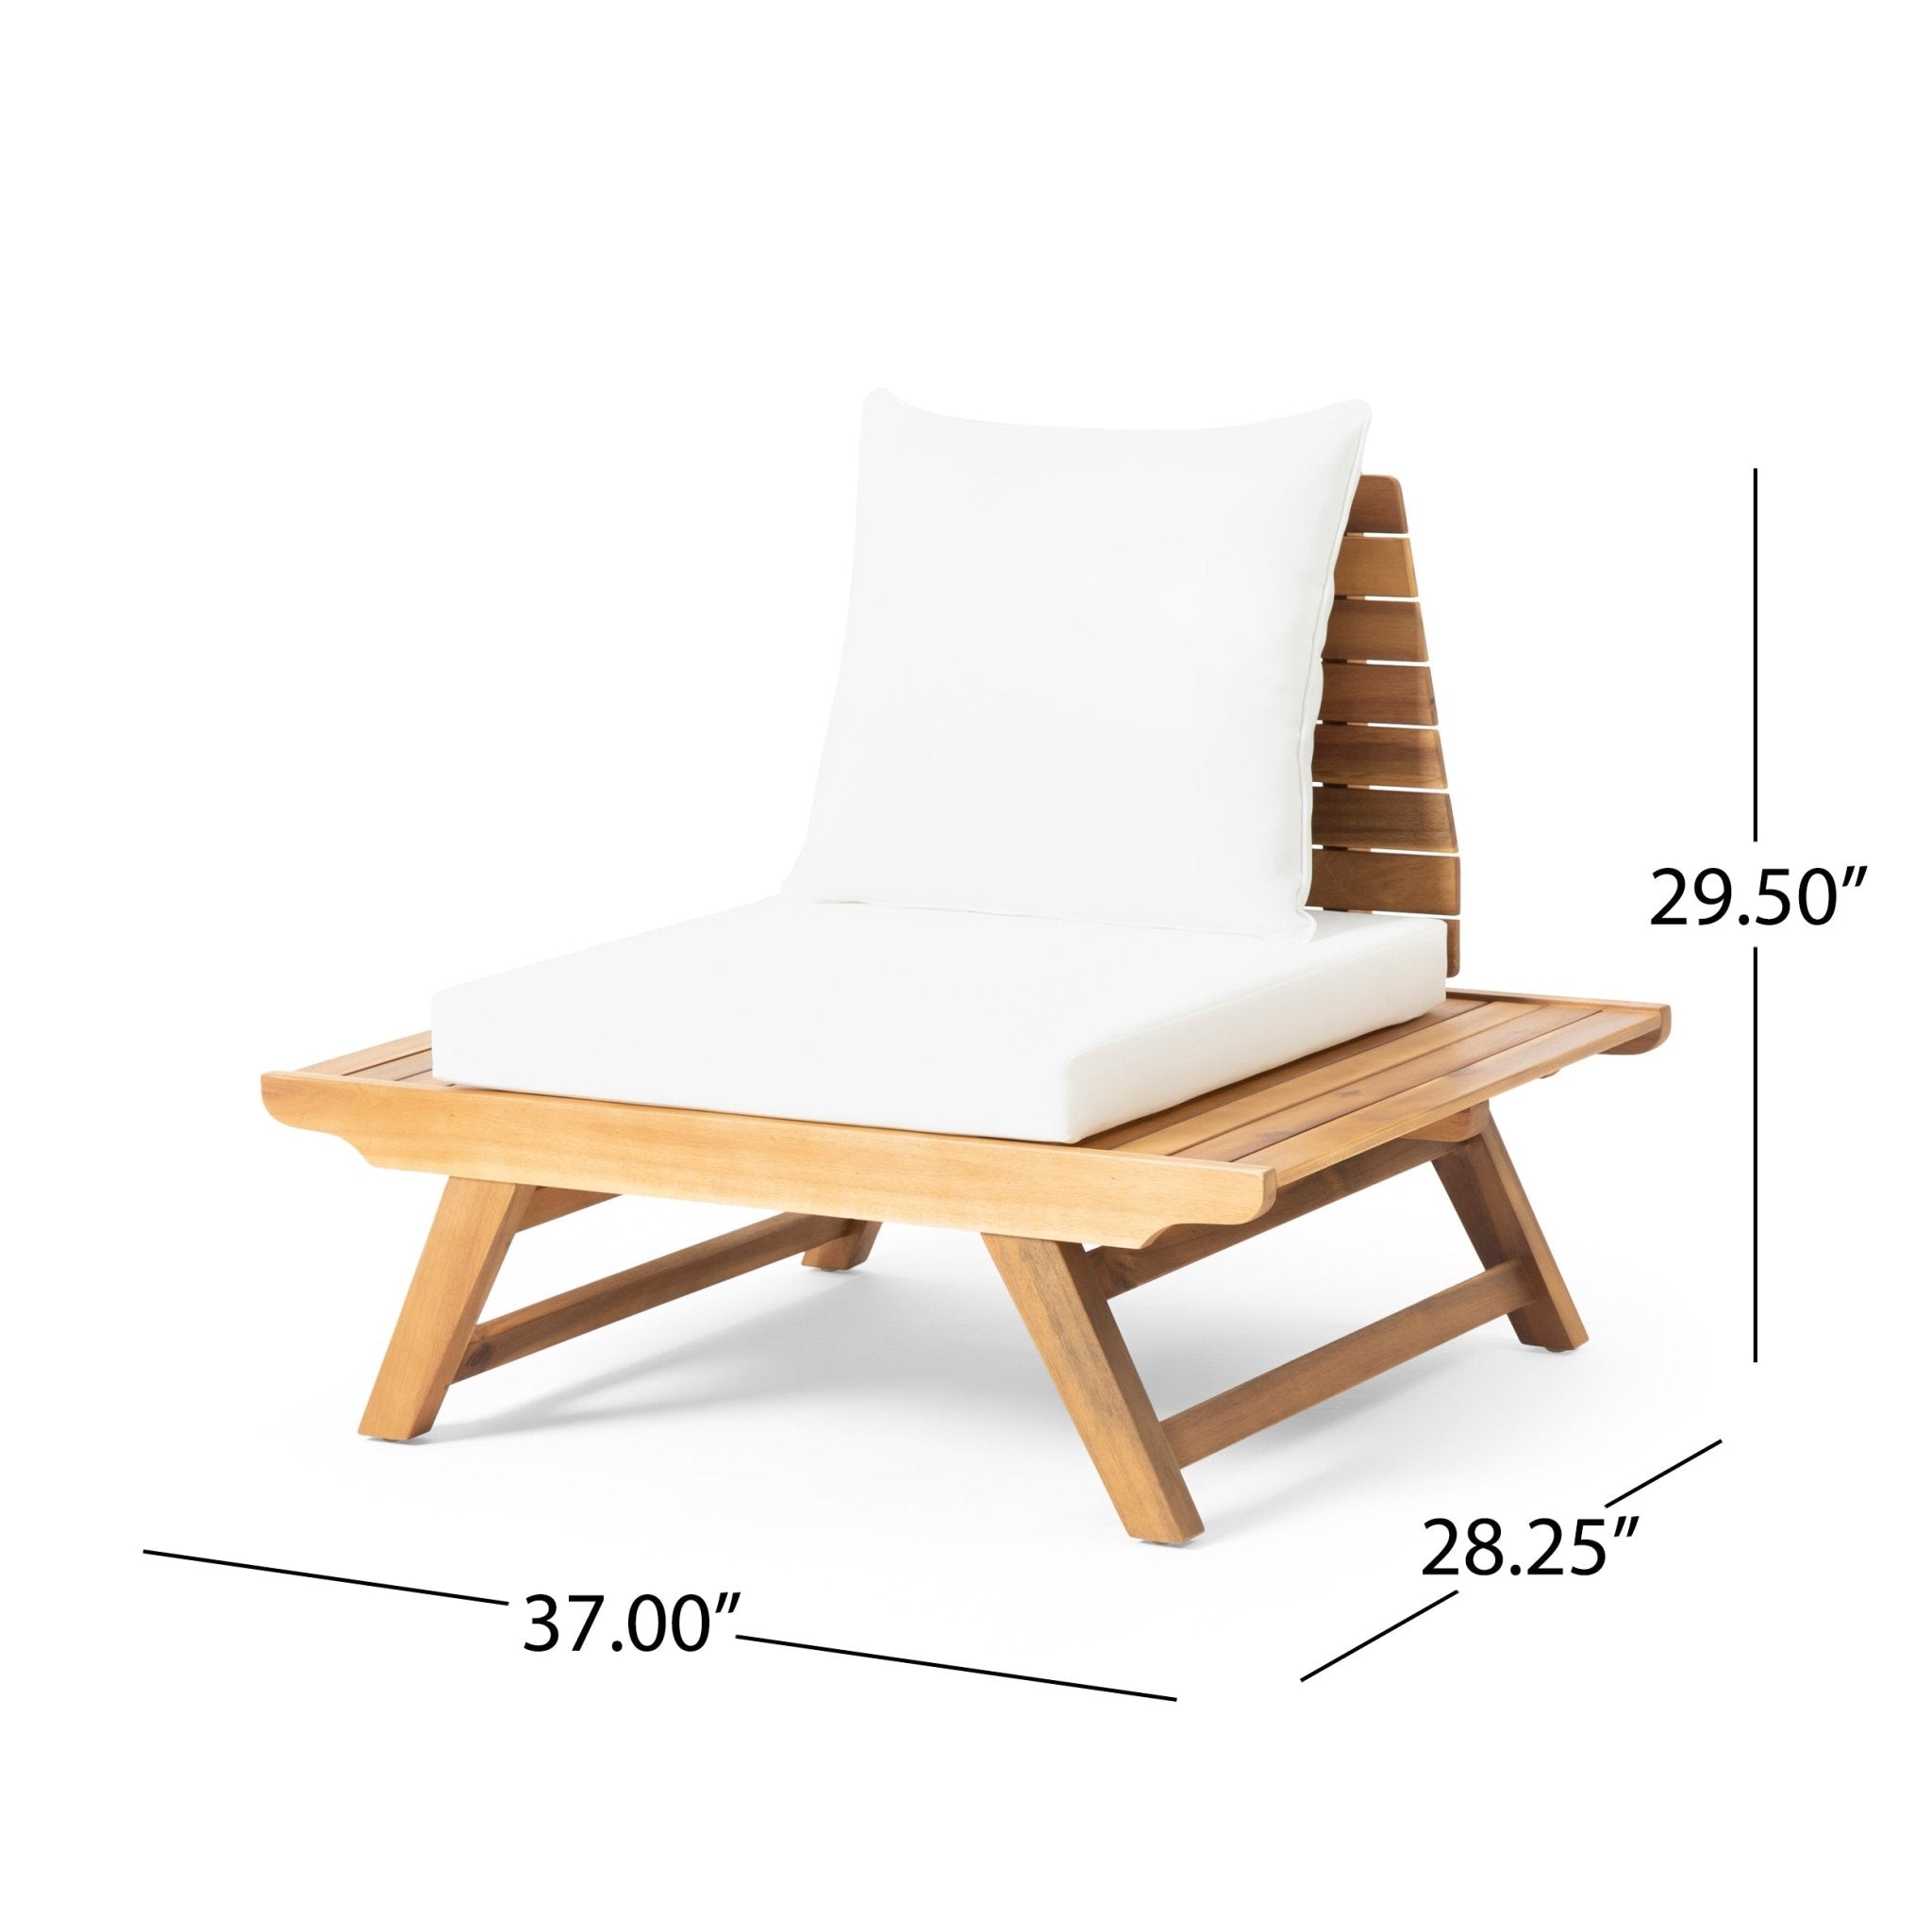 Outdoor Club Chair with Slatted Design and Water Resistance Cushion - Outdoor Seating